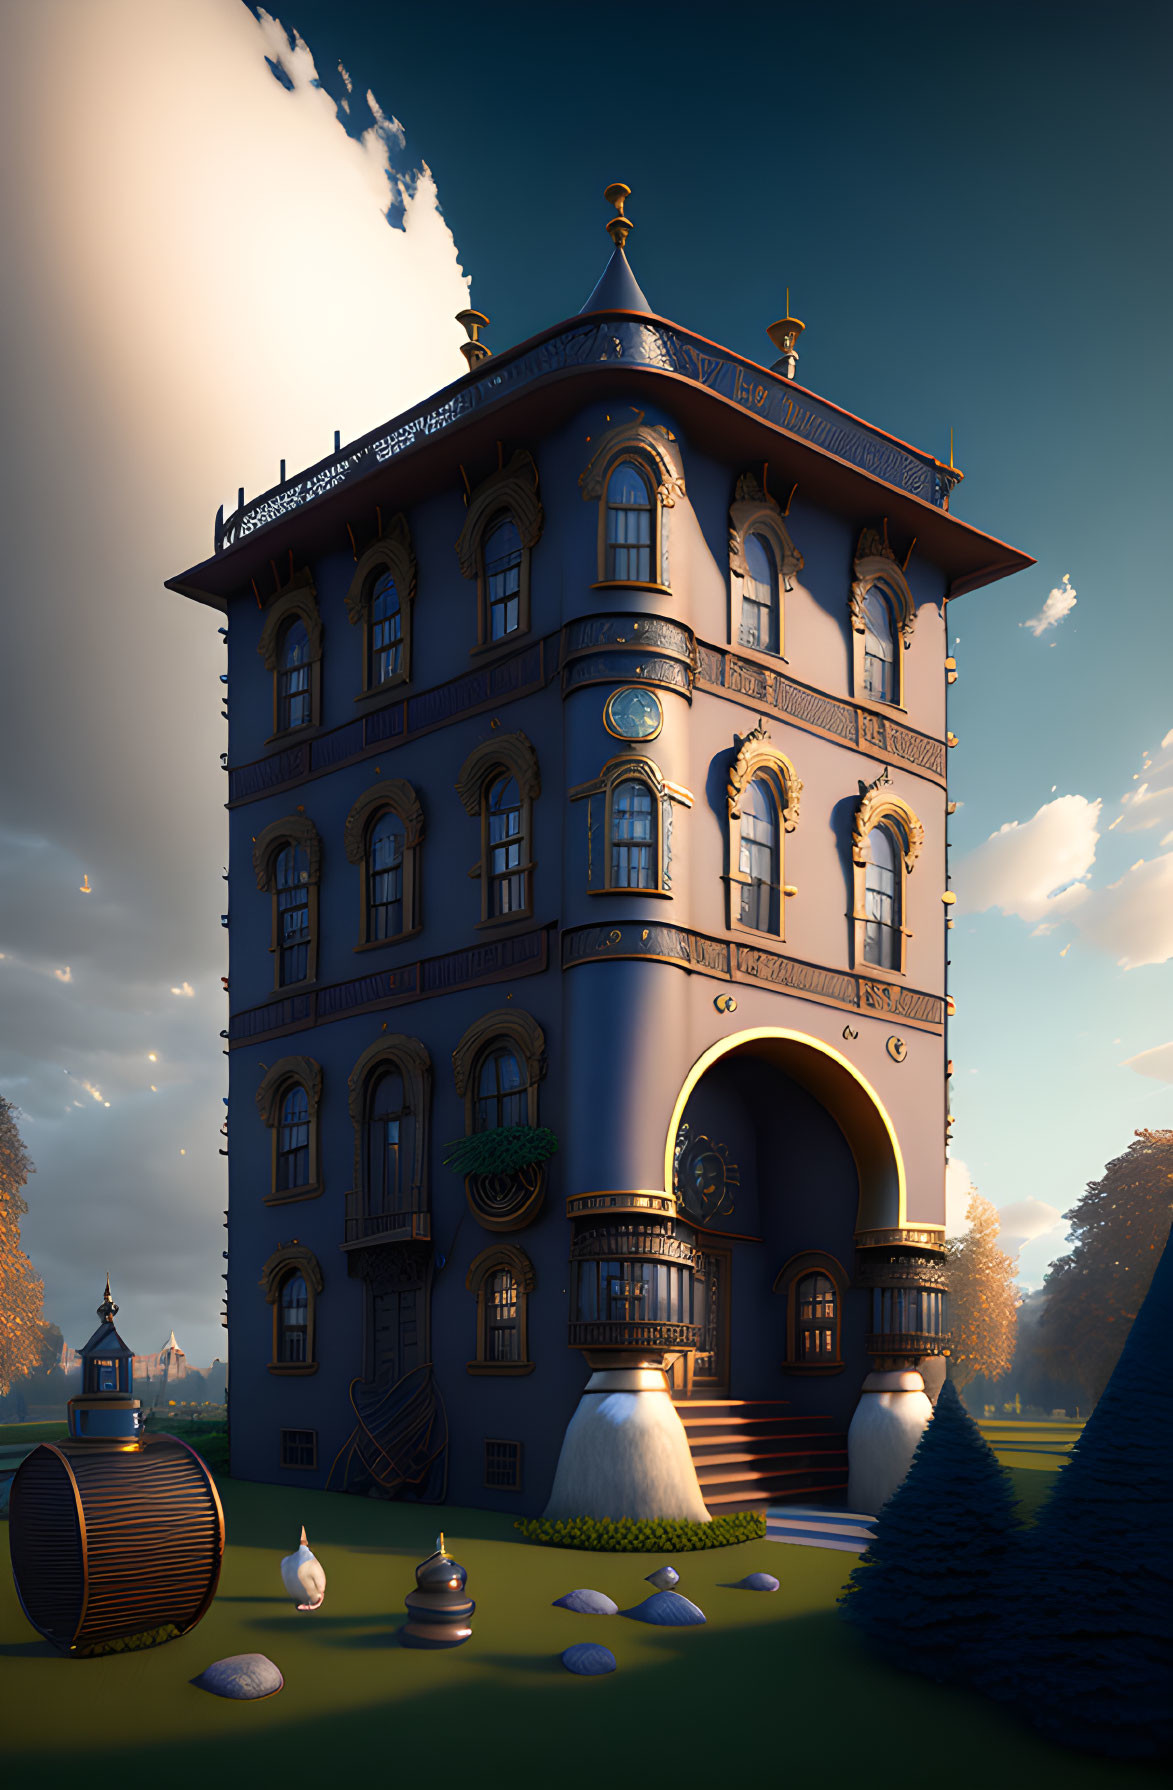 Whimsical narrow building with circular windows and ornate balconies at sunset